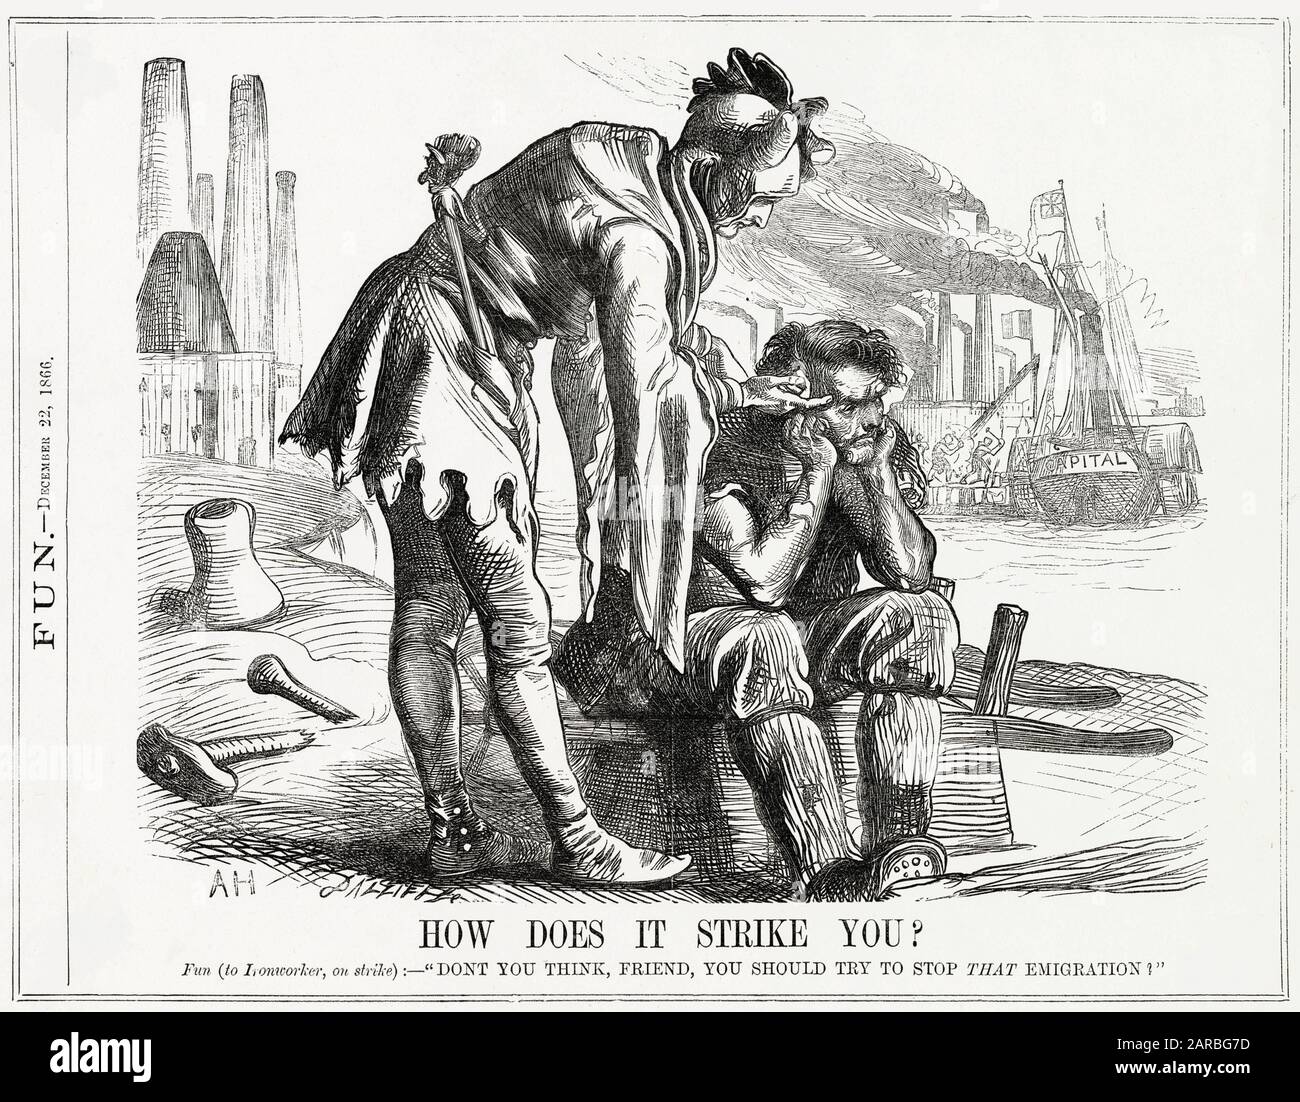 Cartoon, How Does It Strike You?  A jester, representing Fun, asks a grumpy striking ironworker how he feels about a ship named Capital leaving the nation's shores. Stock Photo